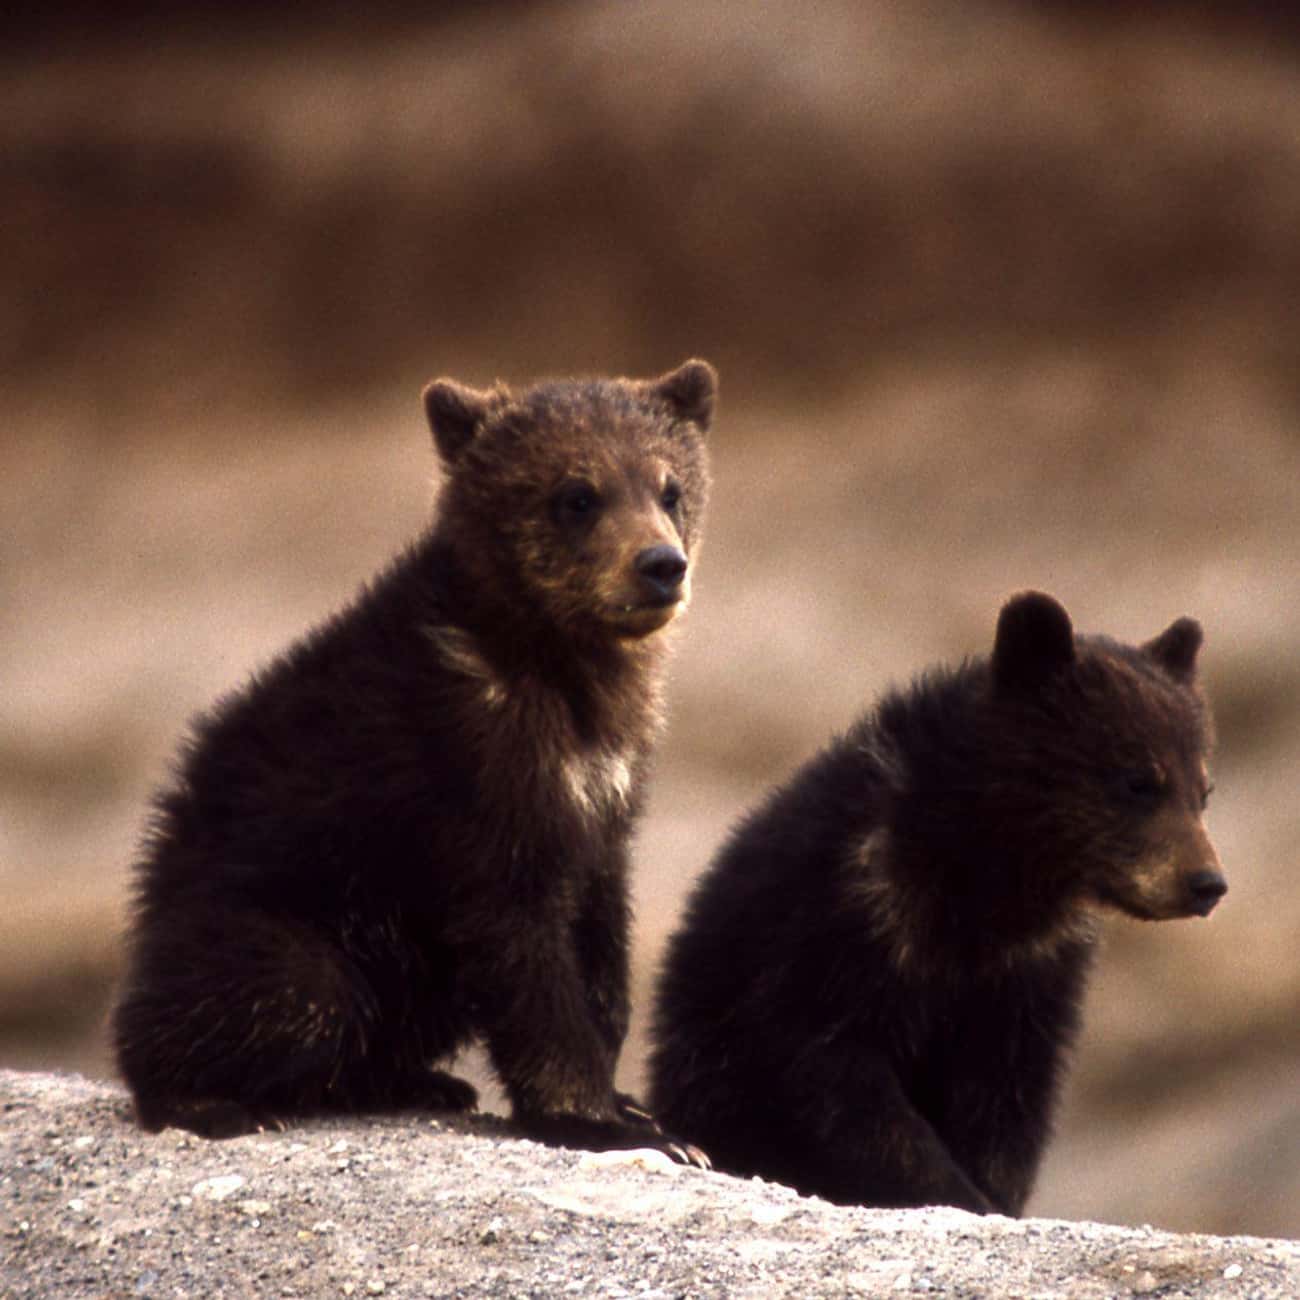 Thomas Jefferson Raised Twin Grizzly Cubs While President